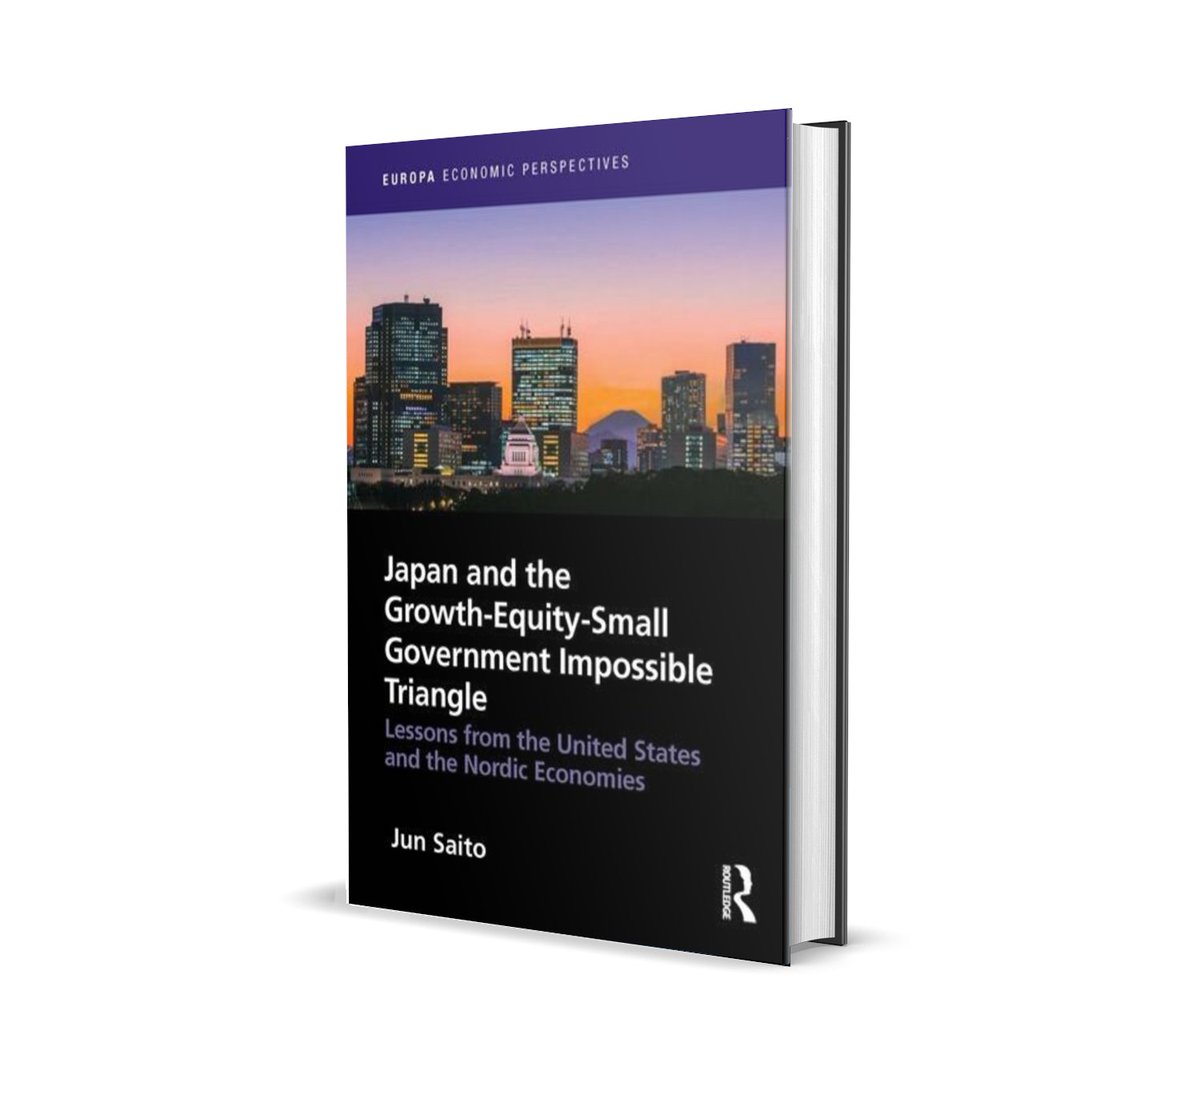 We are pleased to share news of a recent publication, 'Japan and the Growth-Equity-Small Government Impossible Triangle', by alumnus Jun Saito. You can read more about the book here: shorturl.at/emnst